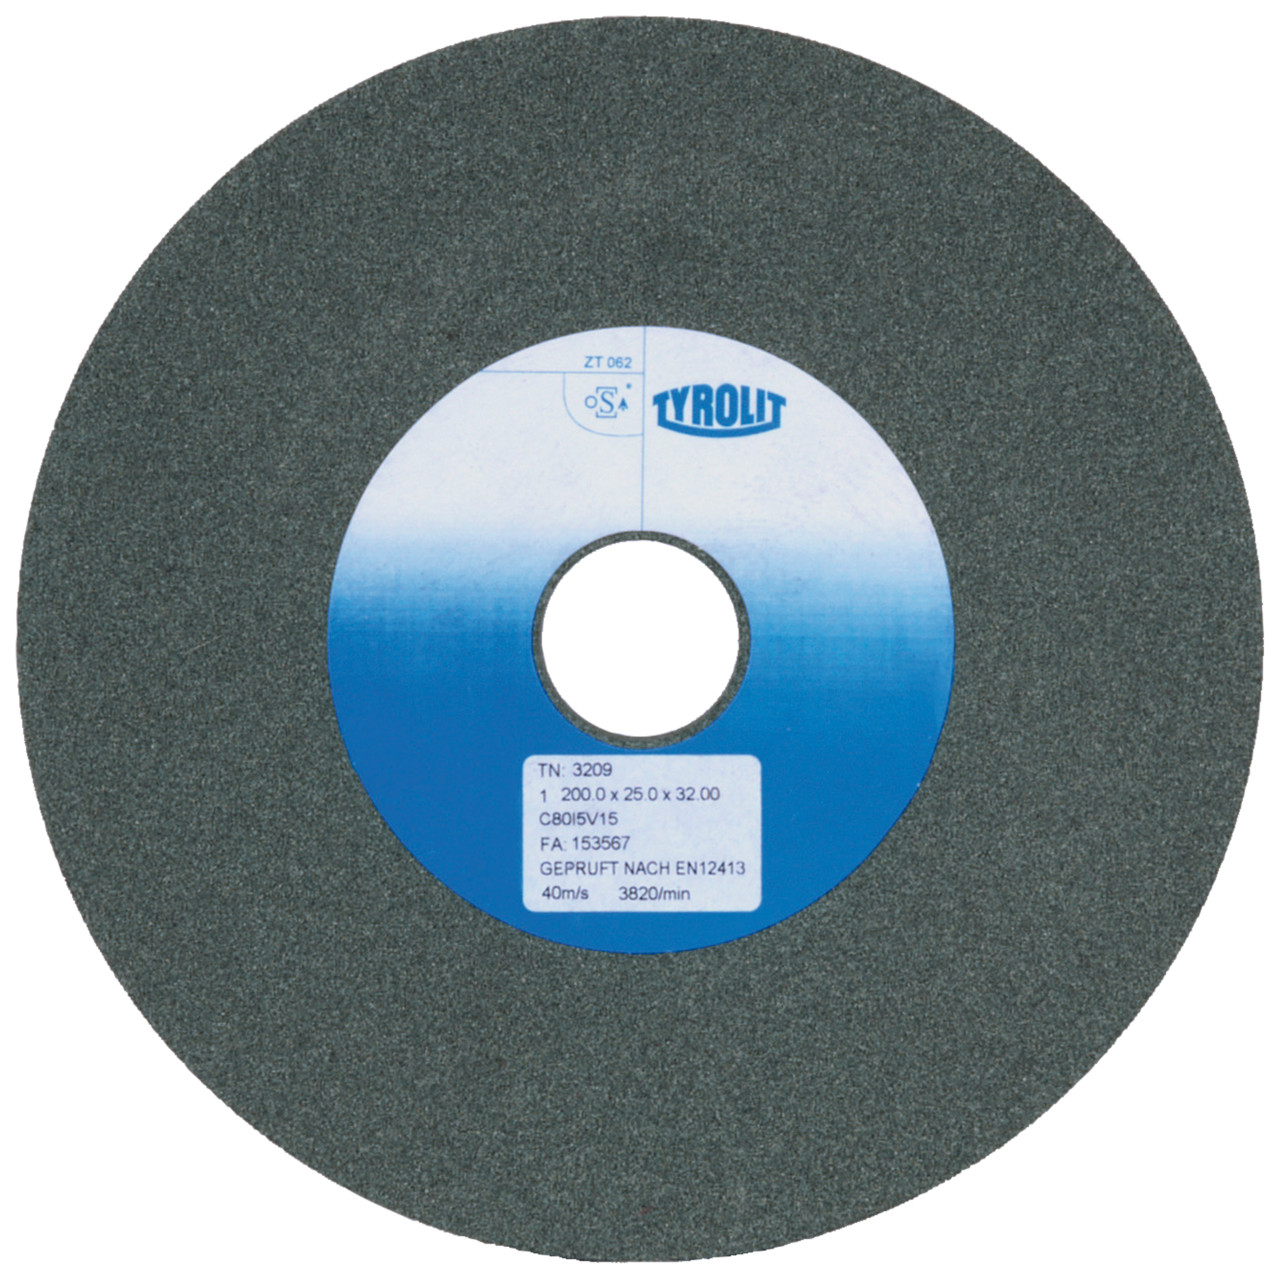 Tyrolit Conventional ceramic grinding discs DxDxH 150x20x32 For carbide and cast iron, shape: 1, Art. 11182